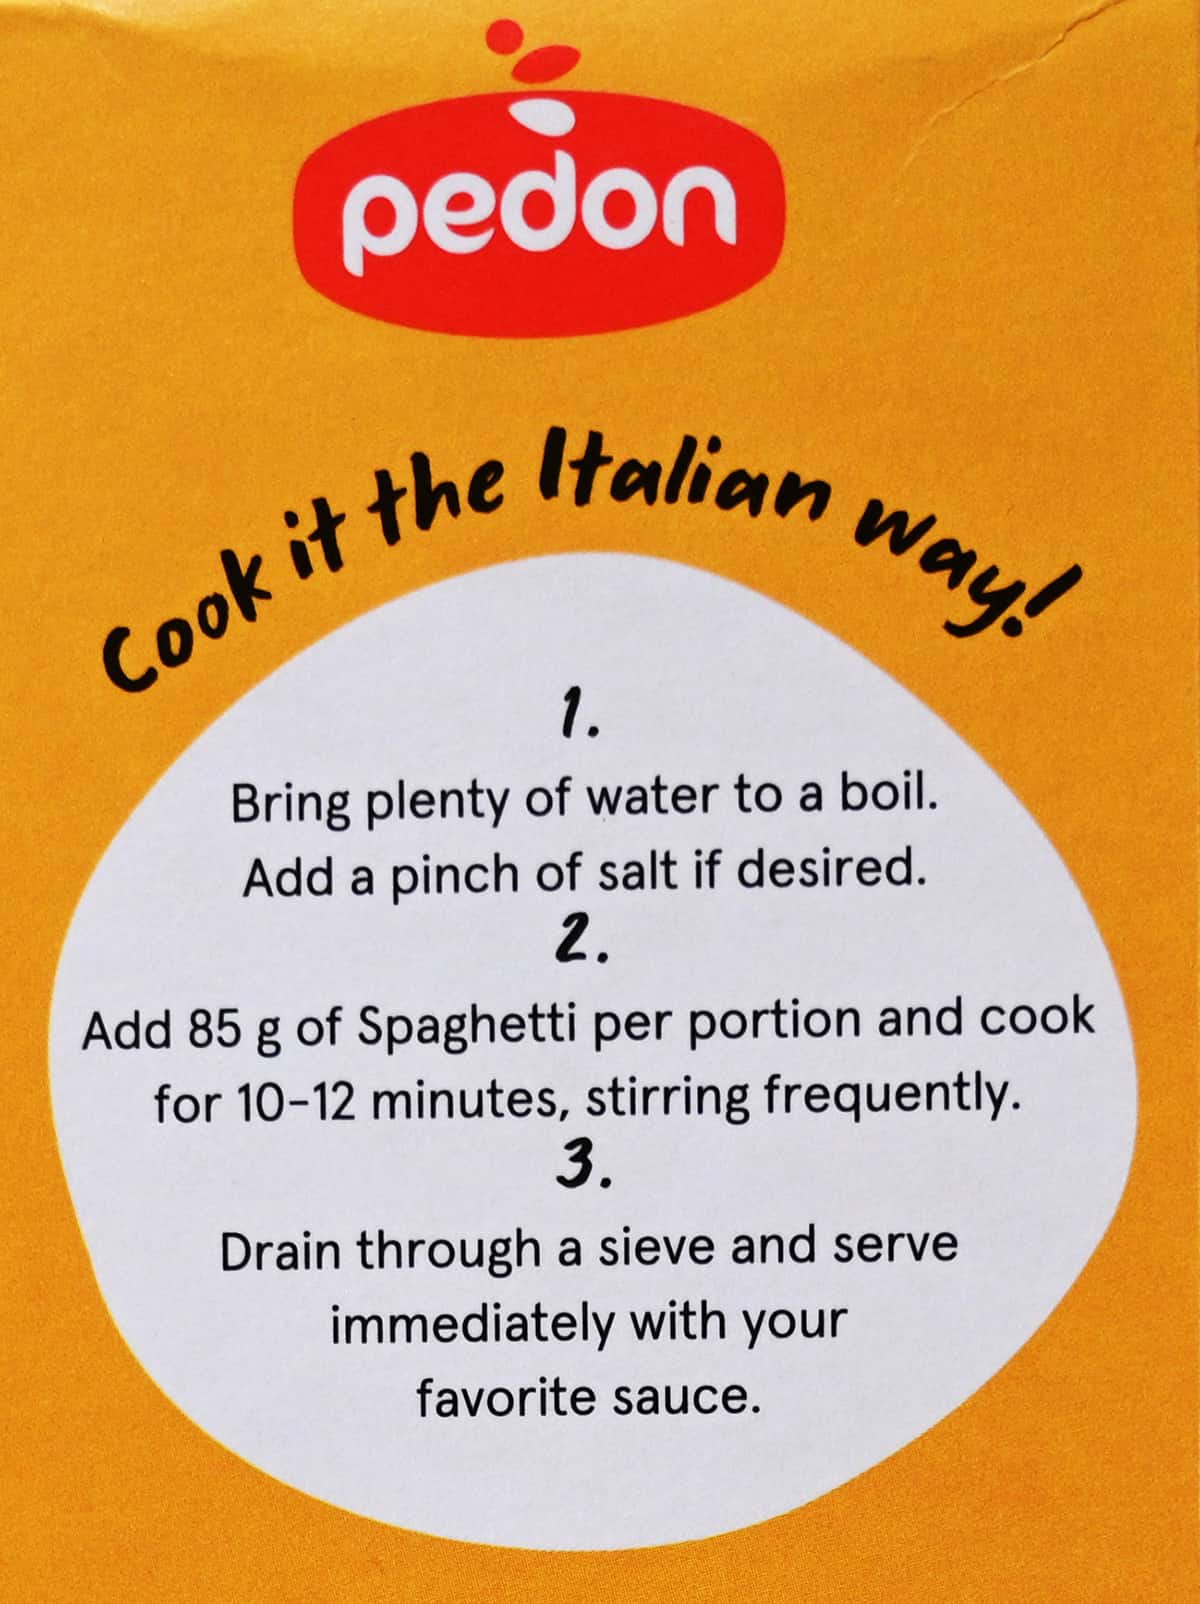 Image of the cooking instructions for the spaghetti from the box.